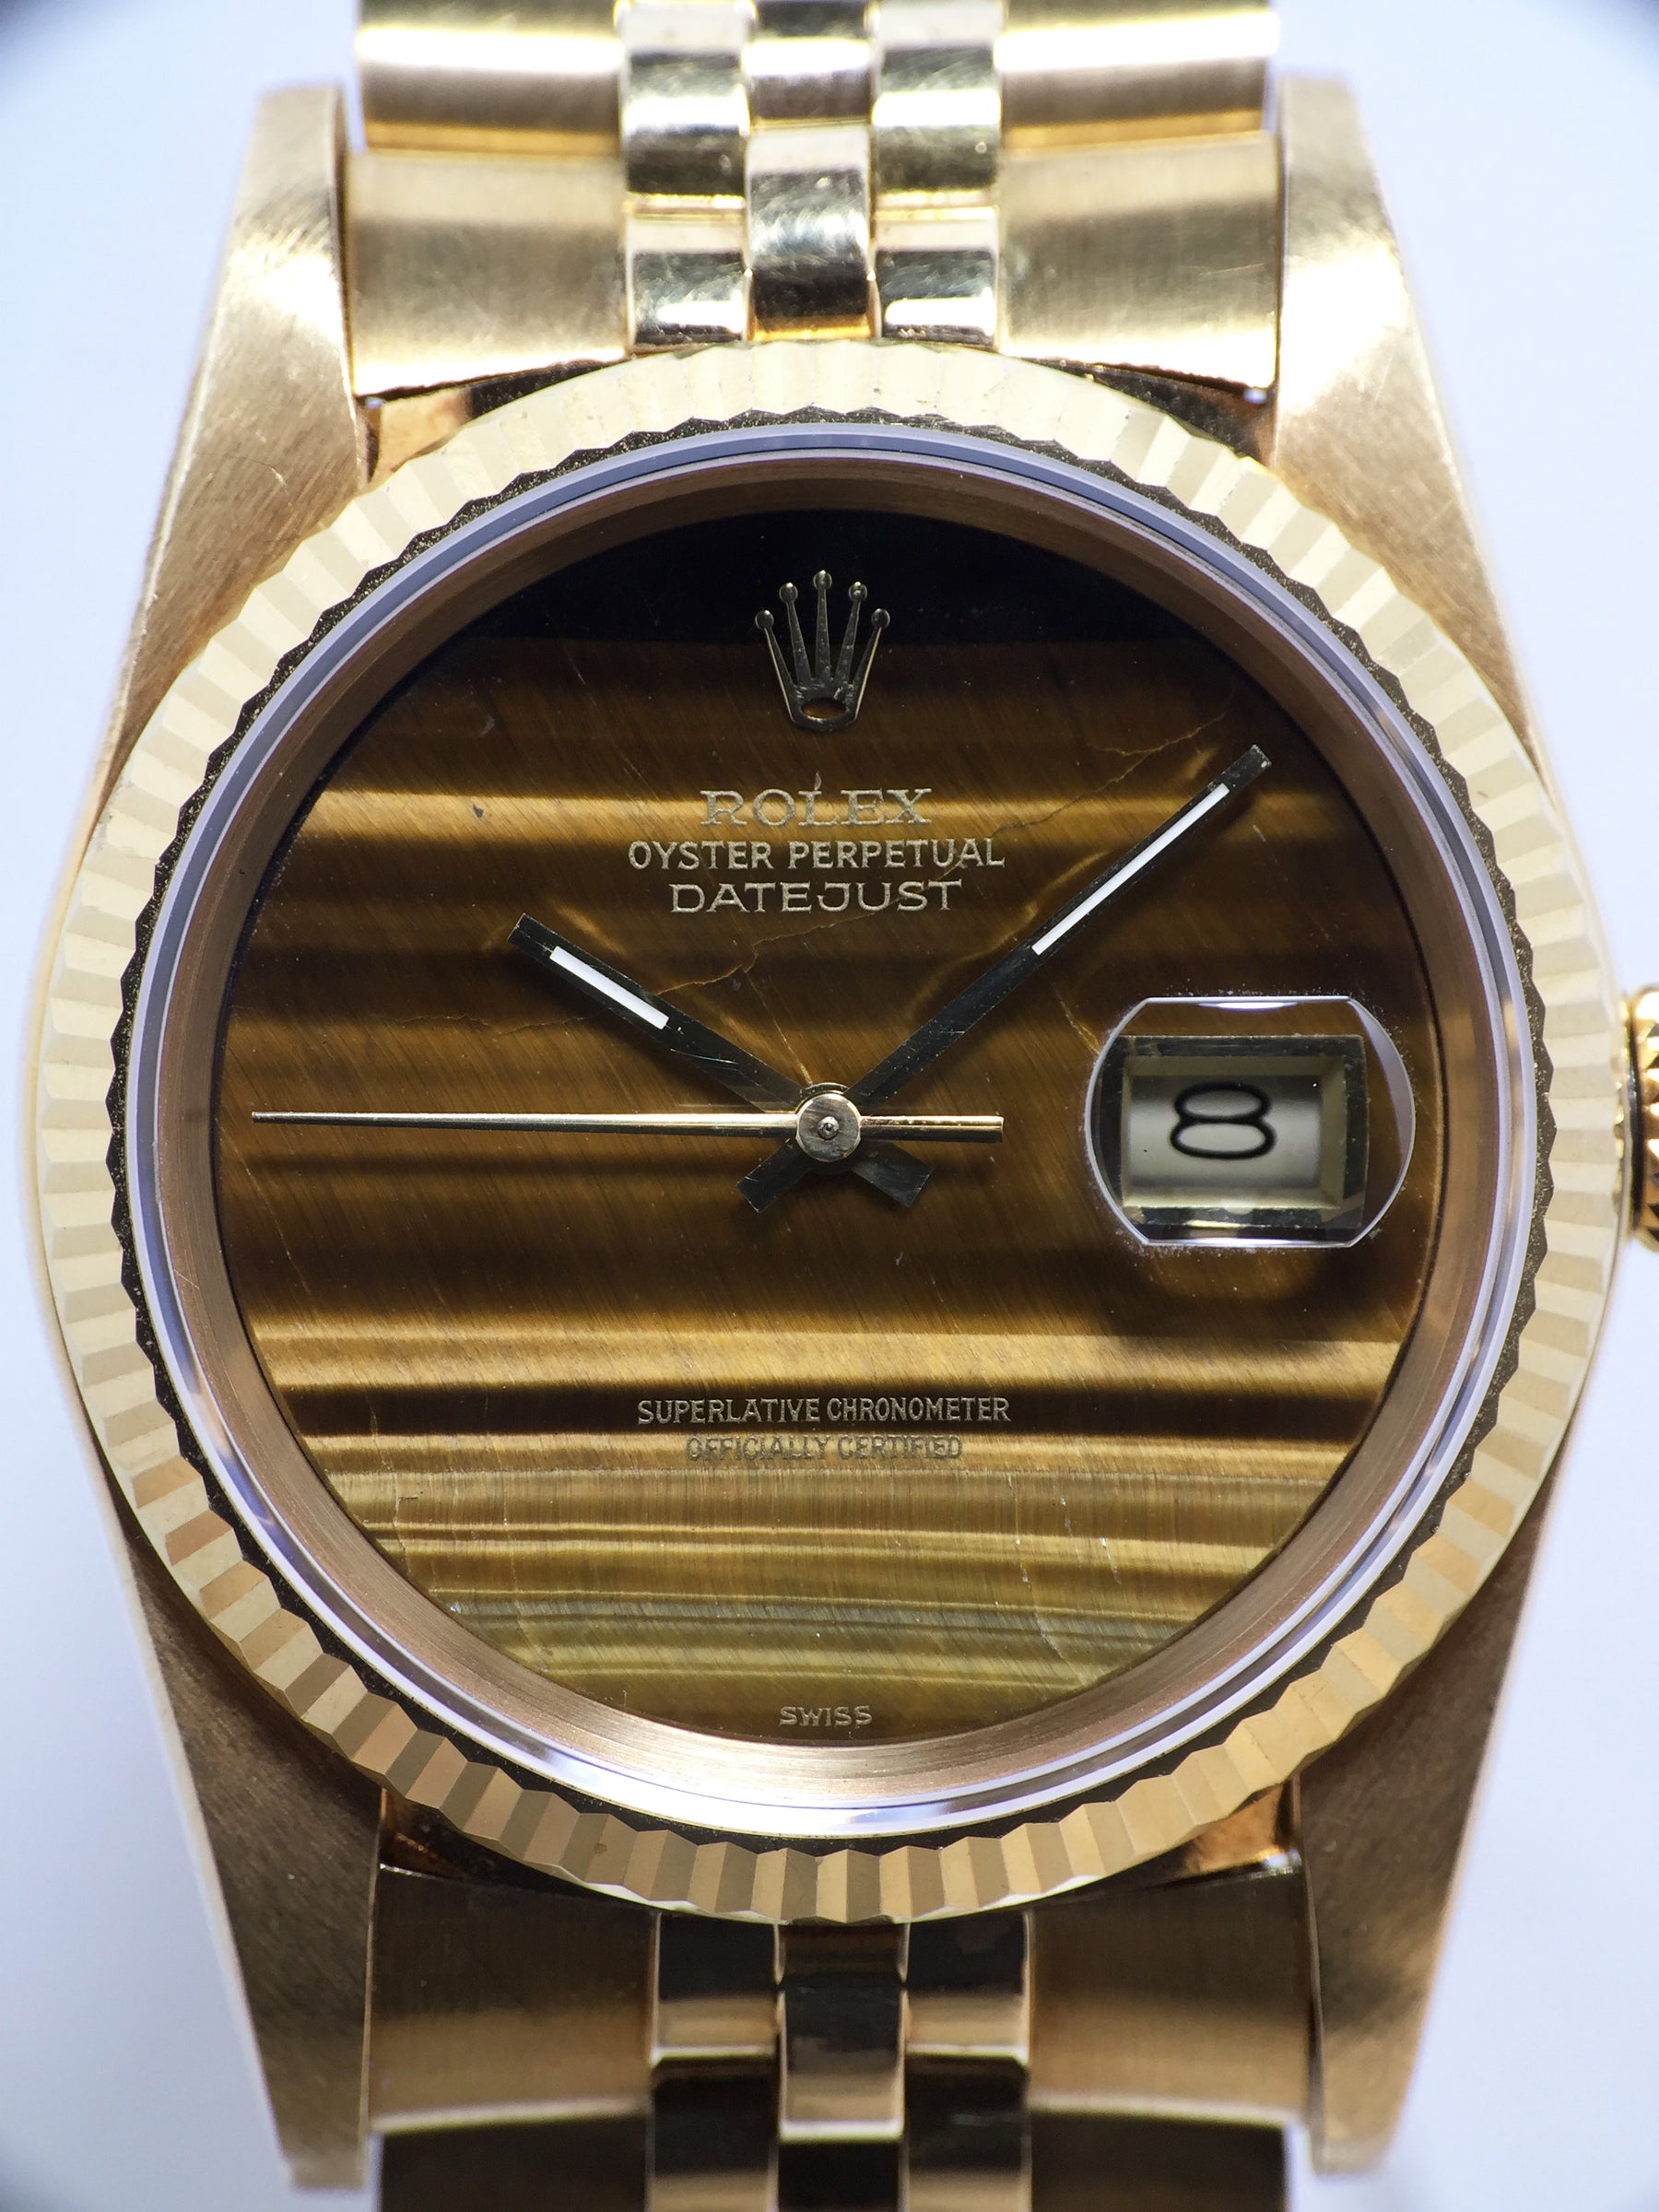 1985 Rolex Datejust Tiger Eye Ref. 16018 (with Certificate)